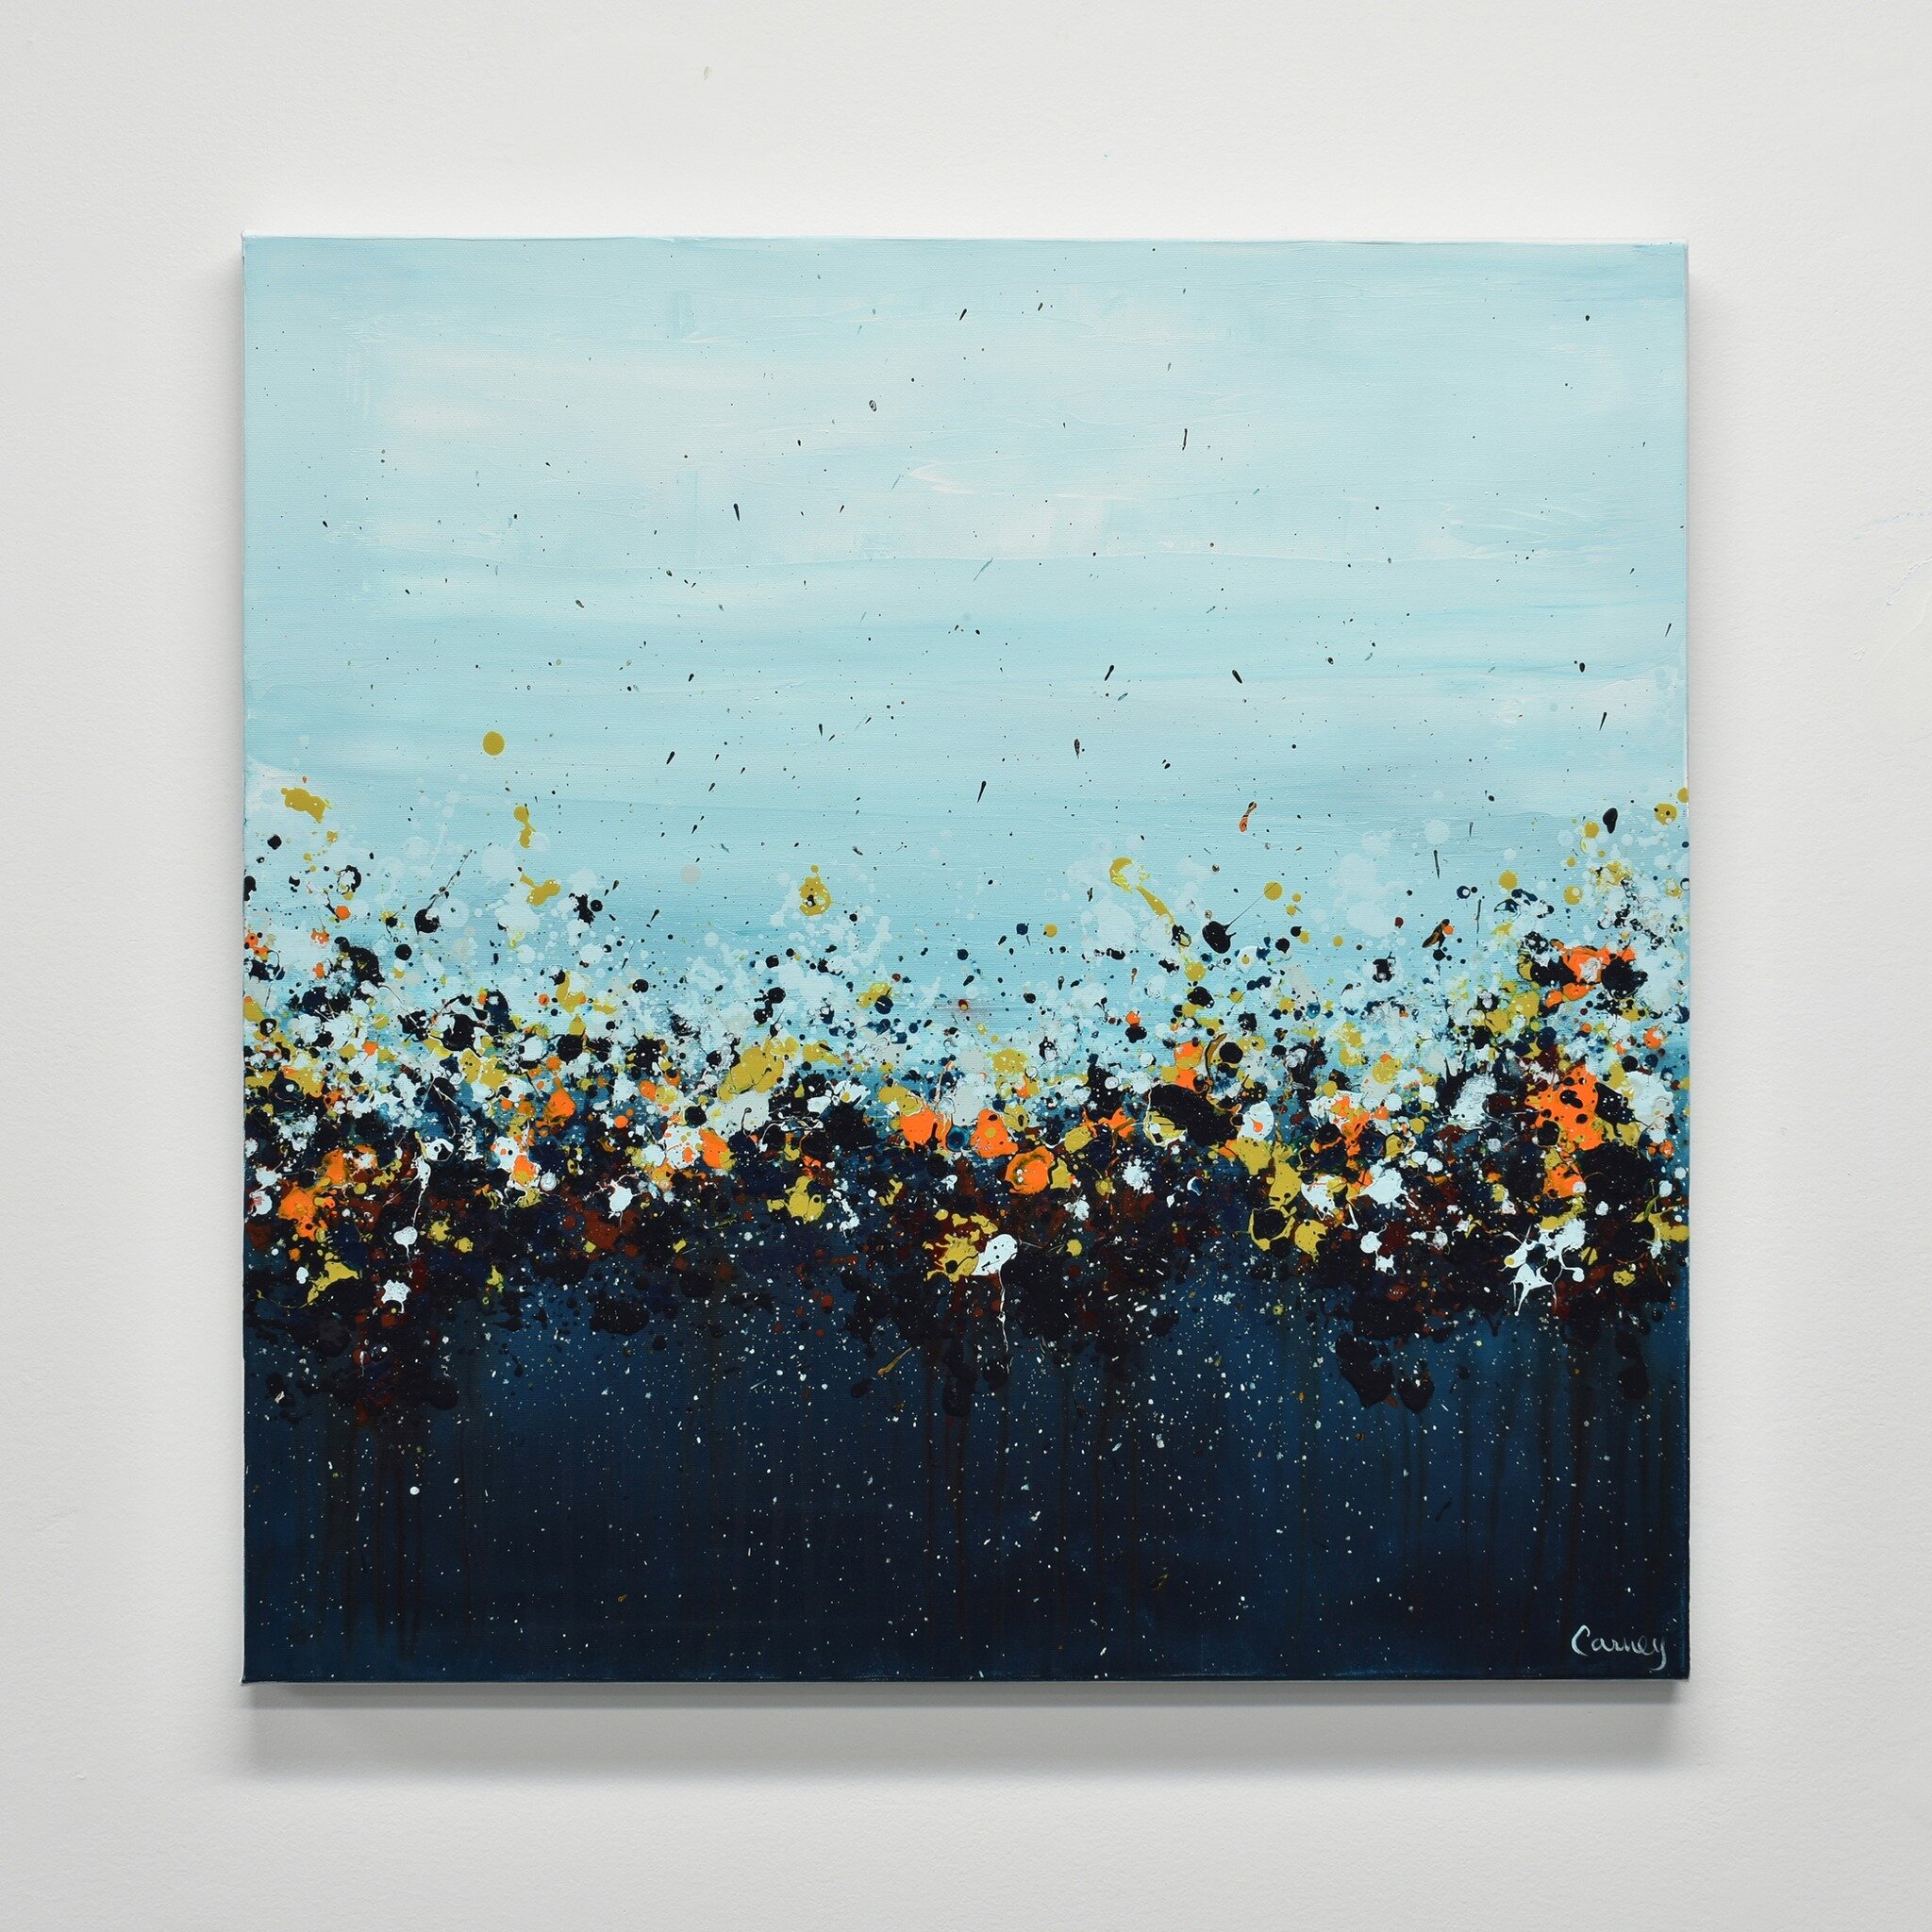 This is a new abstract landscape referencing a wildflower meadow filled with orange flowers under a blue sky. 

Mystic Marigolds - 2024
Acrylic on canvas
24 x 24 x 0.8&quot; (61 x 61 x 2 cm)

Available here: www.LisaCarneyArt.com
...
Voici un nouveau